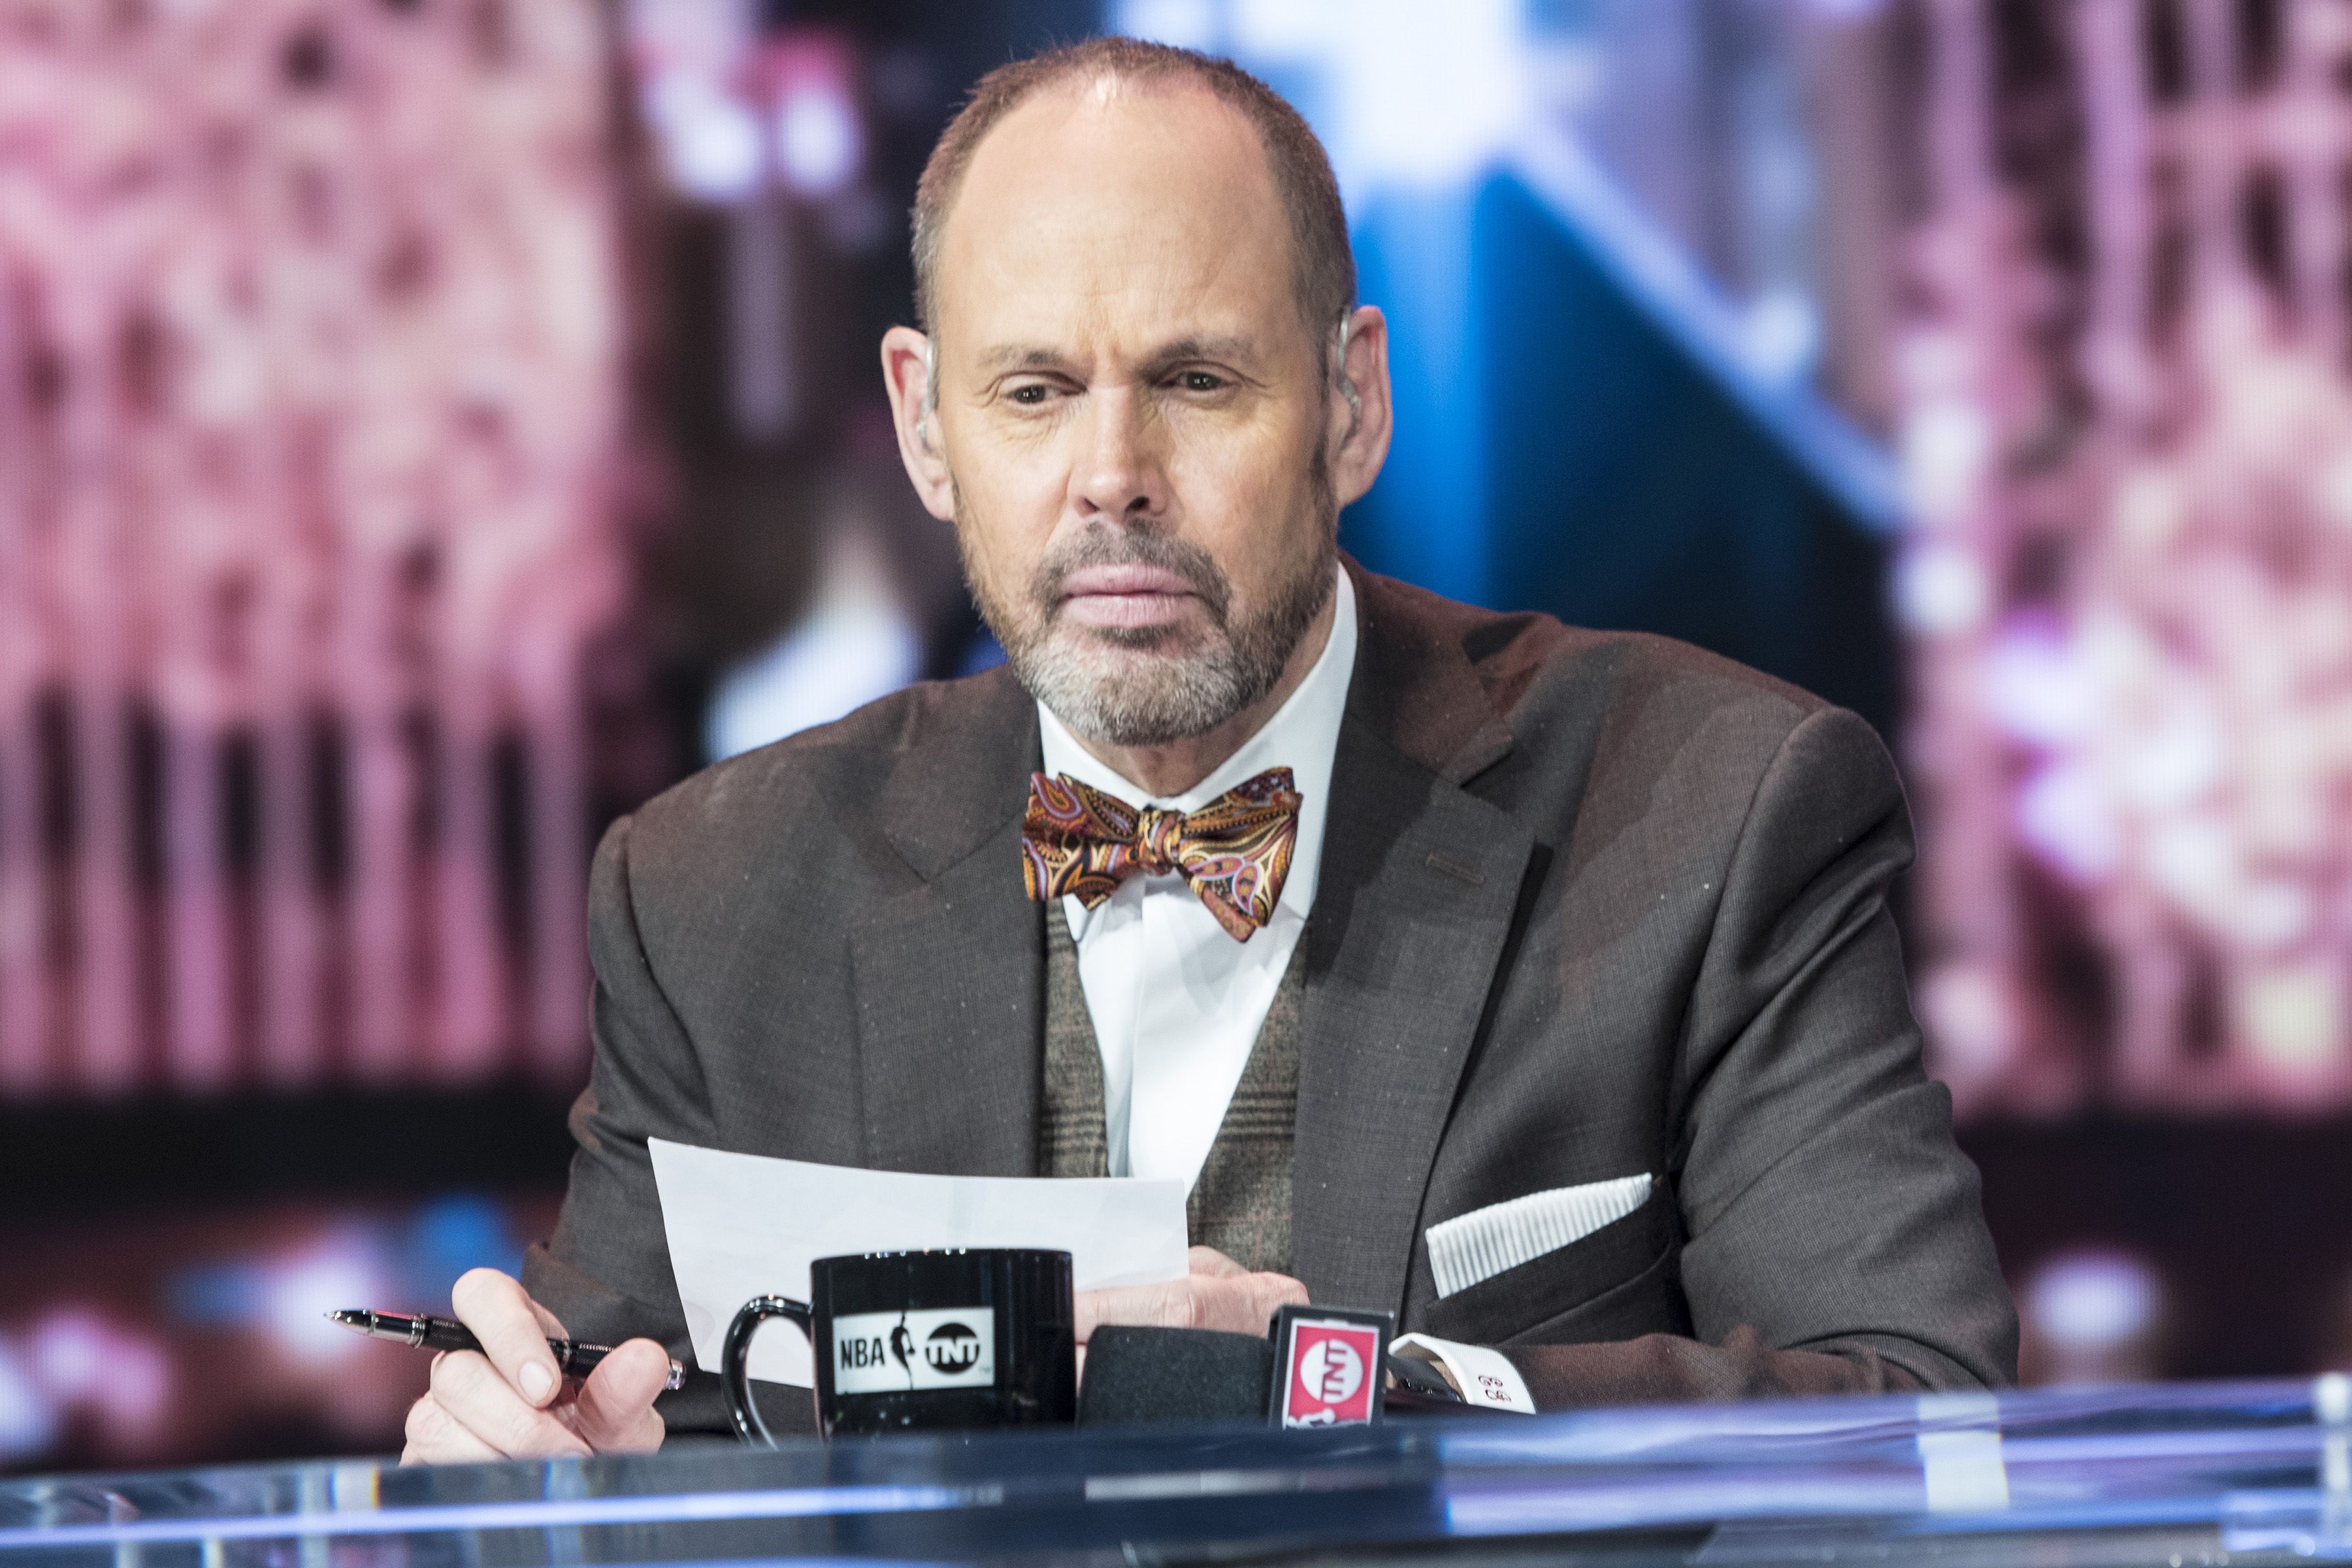 <p>On Oct. 29, 2021, Turner Sports broadcaster Ernie Johnson took to Instagram to share that he and wife Cheryl's son Michael Johnson -- one of four children they adopted -- had died at 33. "We are grieving and at the same time so grateful for having been witnesses to a miraculous 33 years with Michael," the "Inside the NBA" host wrote on Twitter. Ernie also shared a <a href="https://www.instagram.com/p/CVomC0tLEjo/">photo</a> of Michael, who used a ventilator due to respiratory issues, on Instagram, captioning it, "This guy we adopted from Romania in 1991 and [who was] diagnosed with Duchenne muscular dystrophy lived a miraculous life of 33 years. We lost Michael Johnson today and we're crushed. But we also know we'll see him again…and that sustains us."</p>